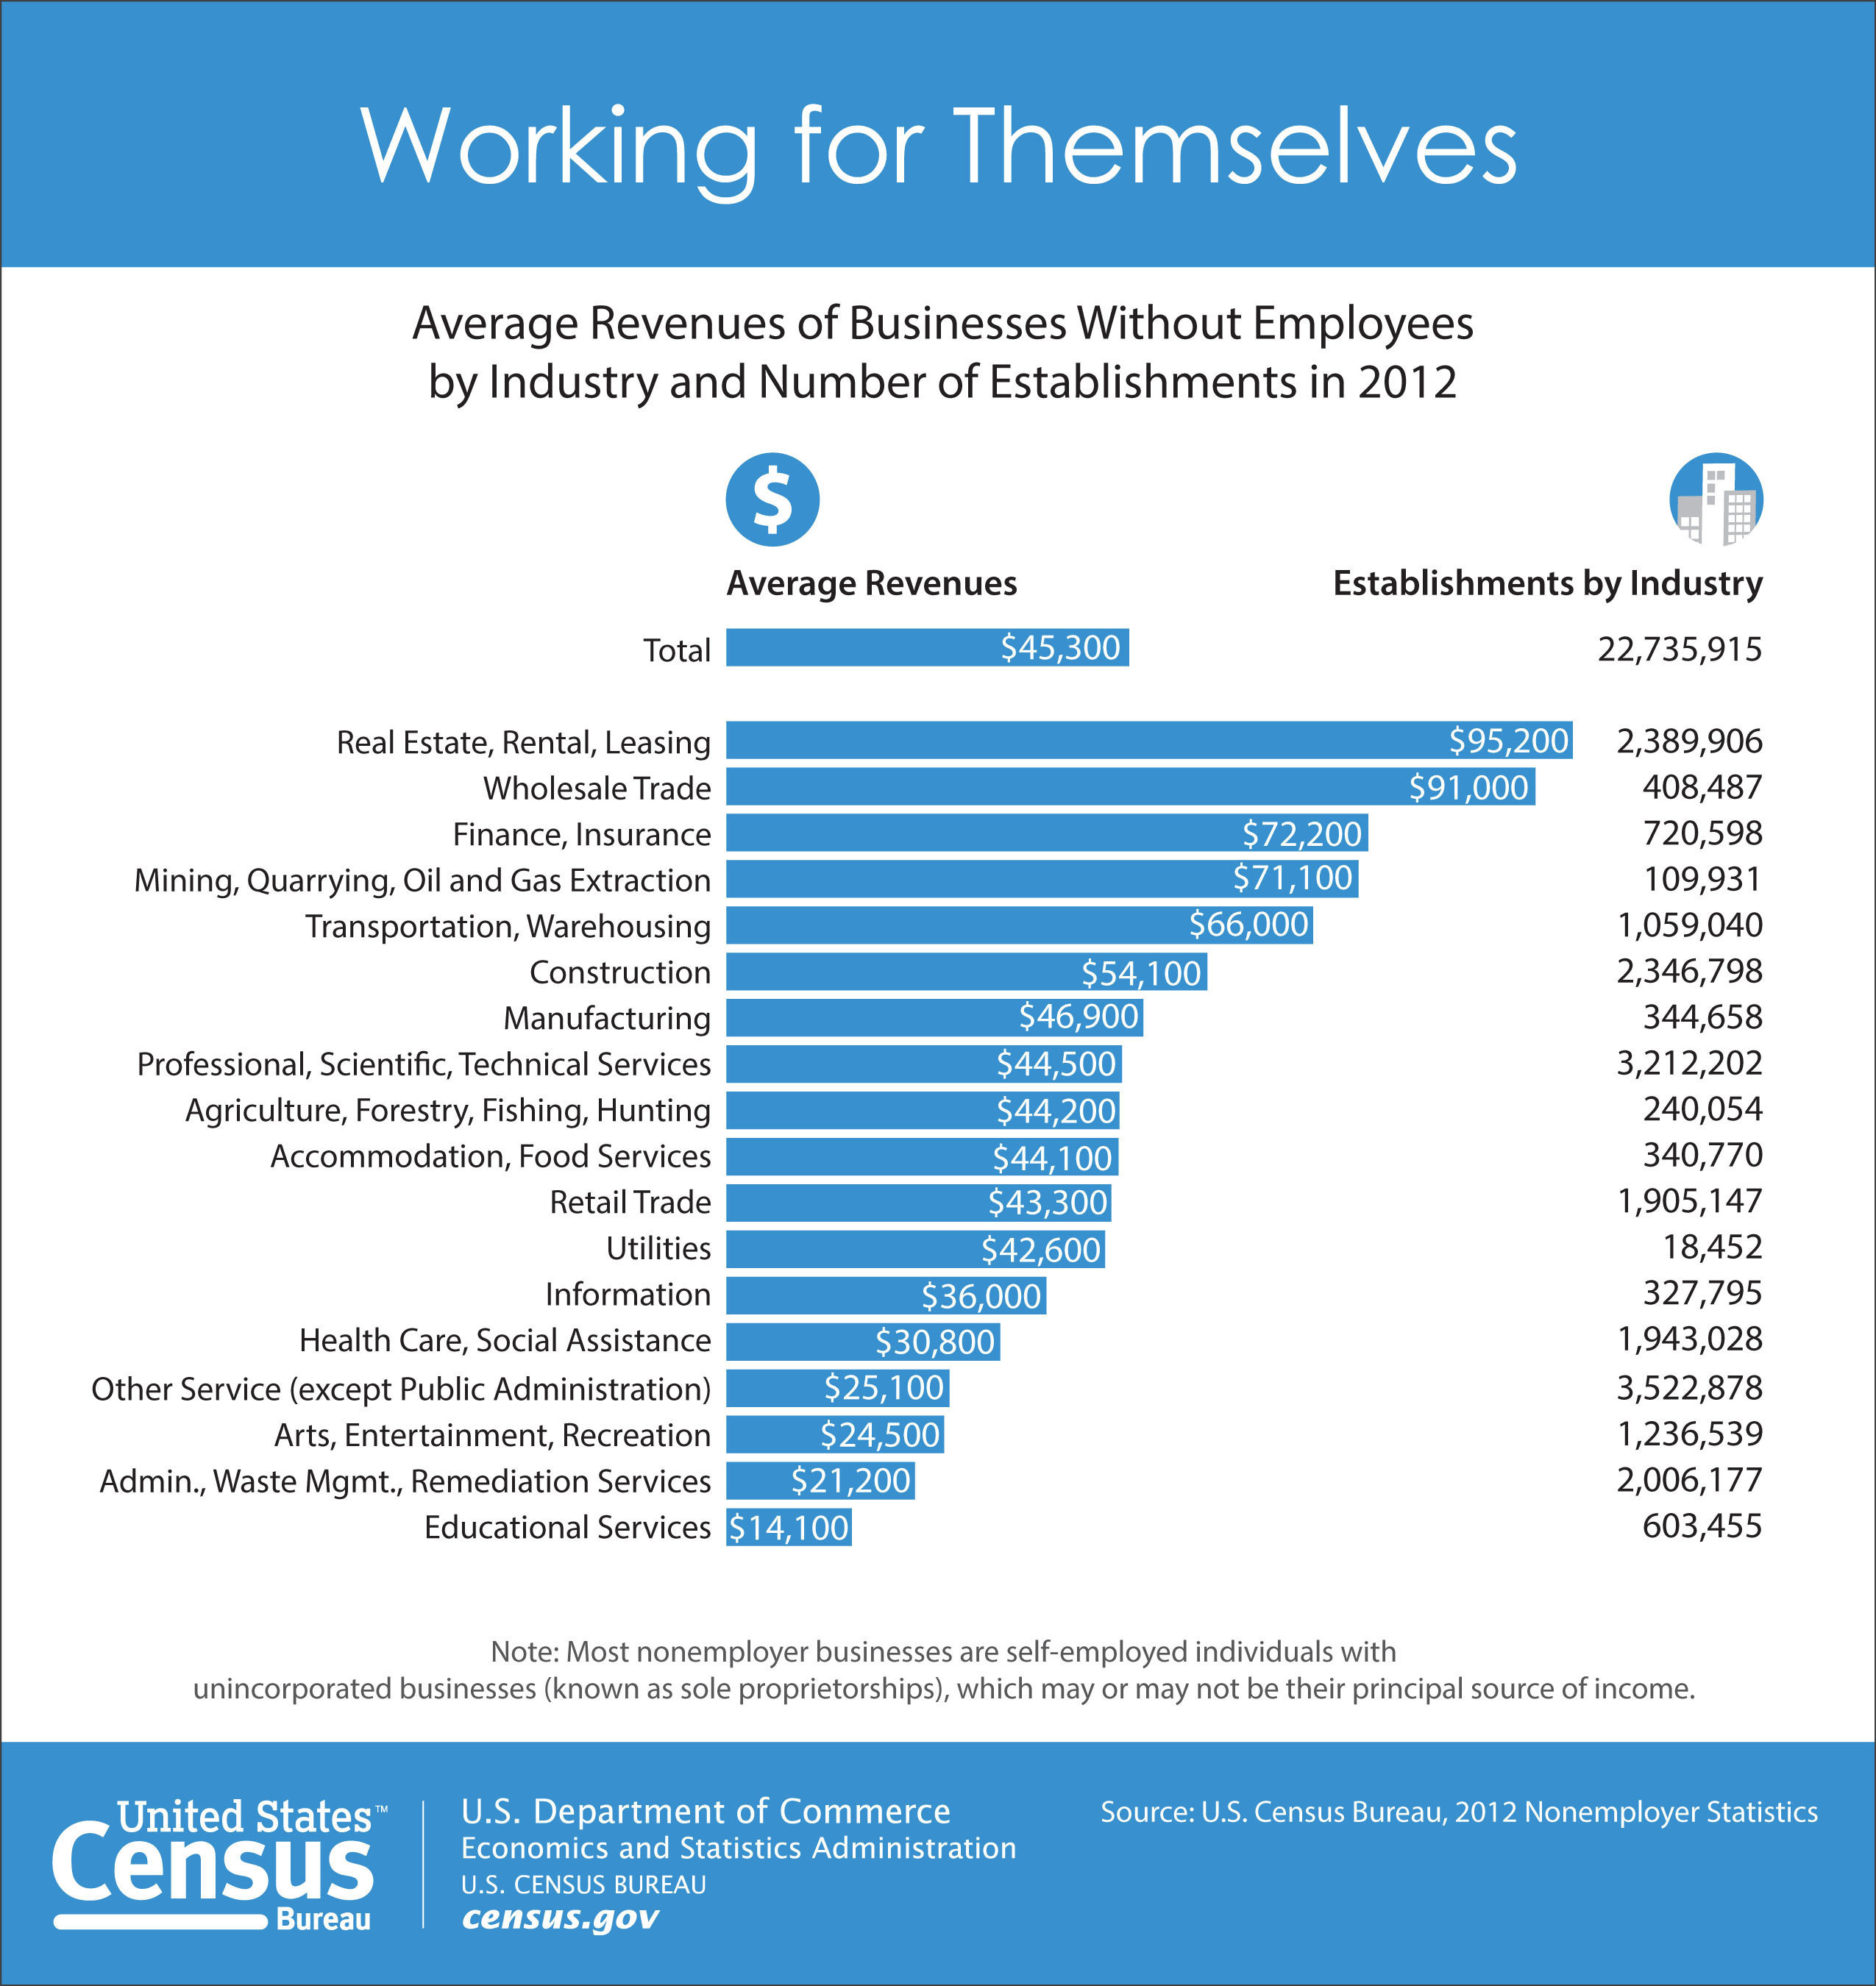 Census Bureau Reports U.S. Economy Added Nearly 245,000 Nonemployer Businesses in 2012. The number of businesses without paid employees in the U.S. reached 22.7 million in 2012, up 1.1 percent from 2011. This marks the third straight annual increase in businesses with no paid employees. Nearly all industry sectors that make up nonemployer businesses experienced growth in the number of establishments and receipts including nearly 450 industries in metropolitan areas, counties, states and nationwide.  (PRNewsFoto/U.S. Census Bureau )